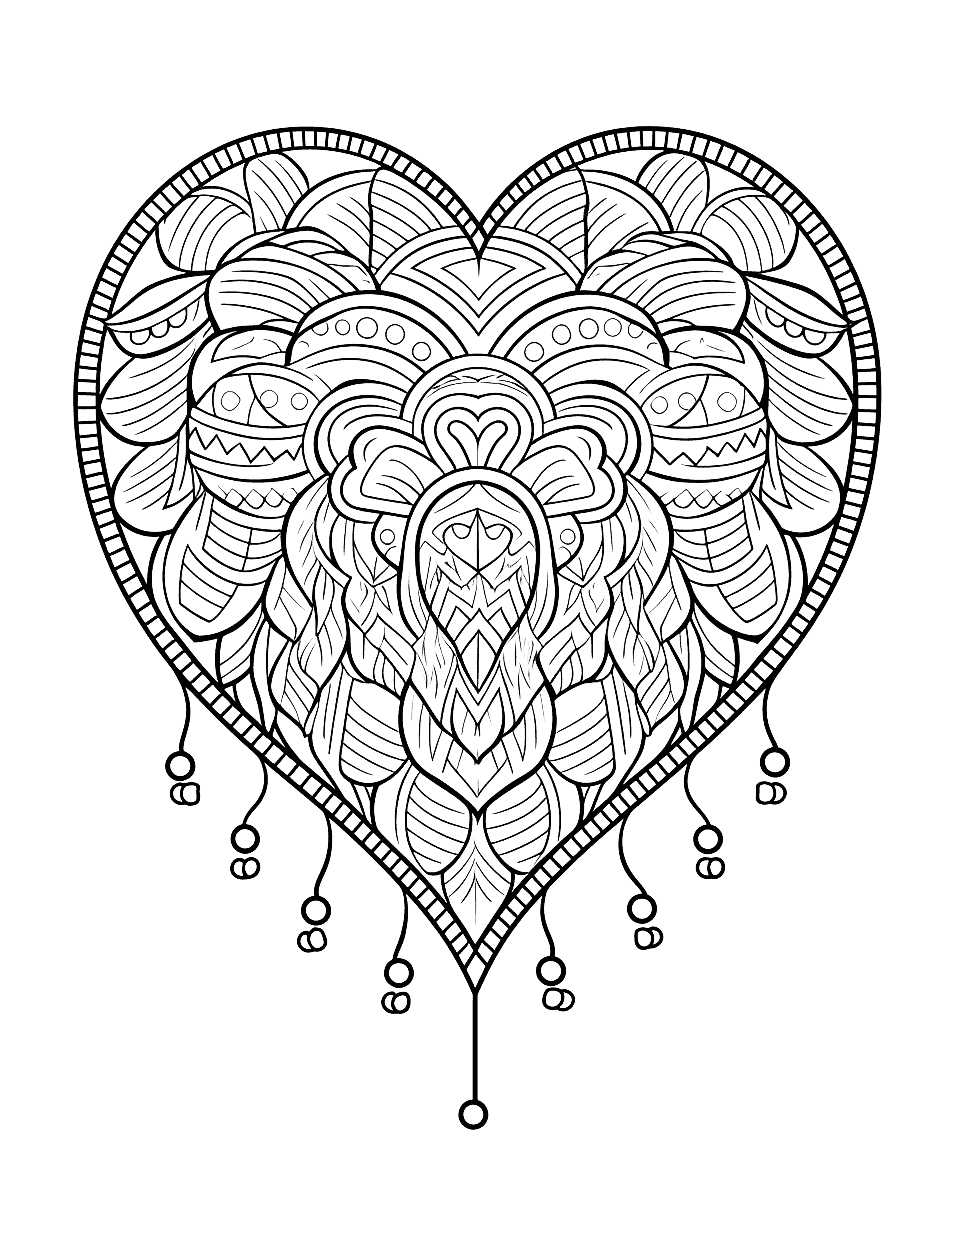 Dream Catcher Heart Coloring Page - A heart-shaped dream catcher with detailed feathers and beads.